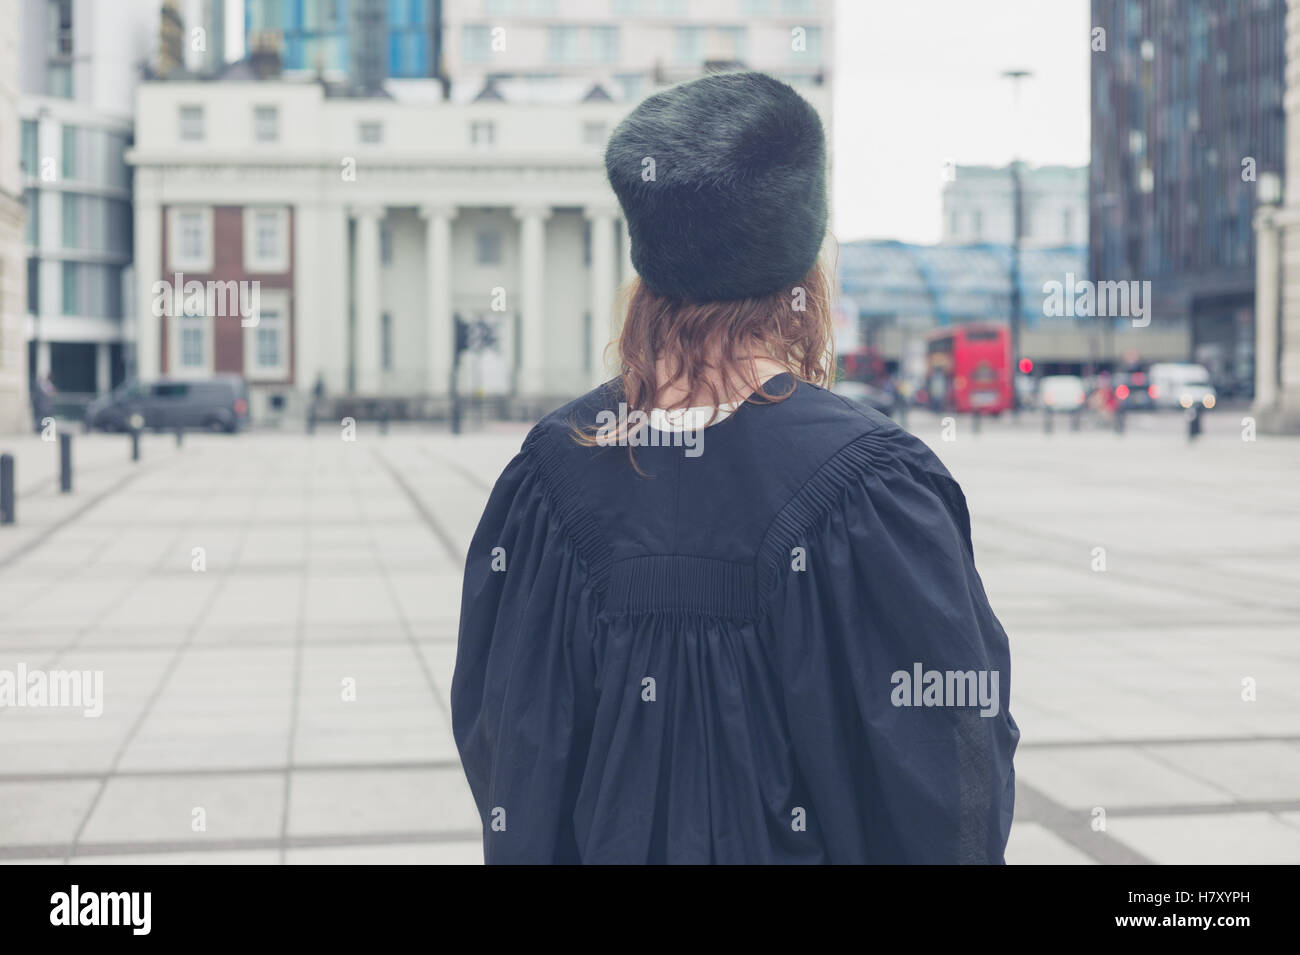 A young woman wearing a fur hat and a black graduation gown is standing in a square Stock Photo